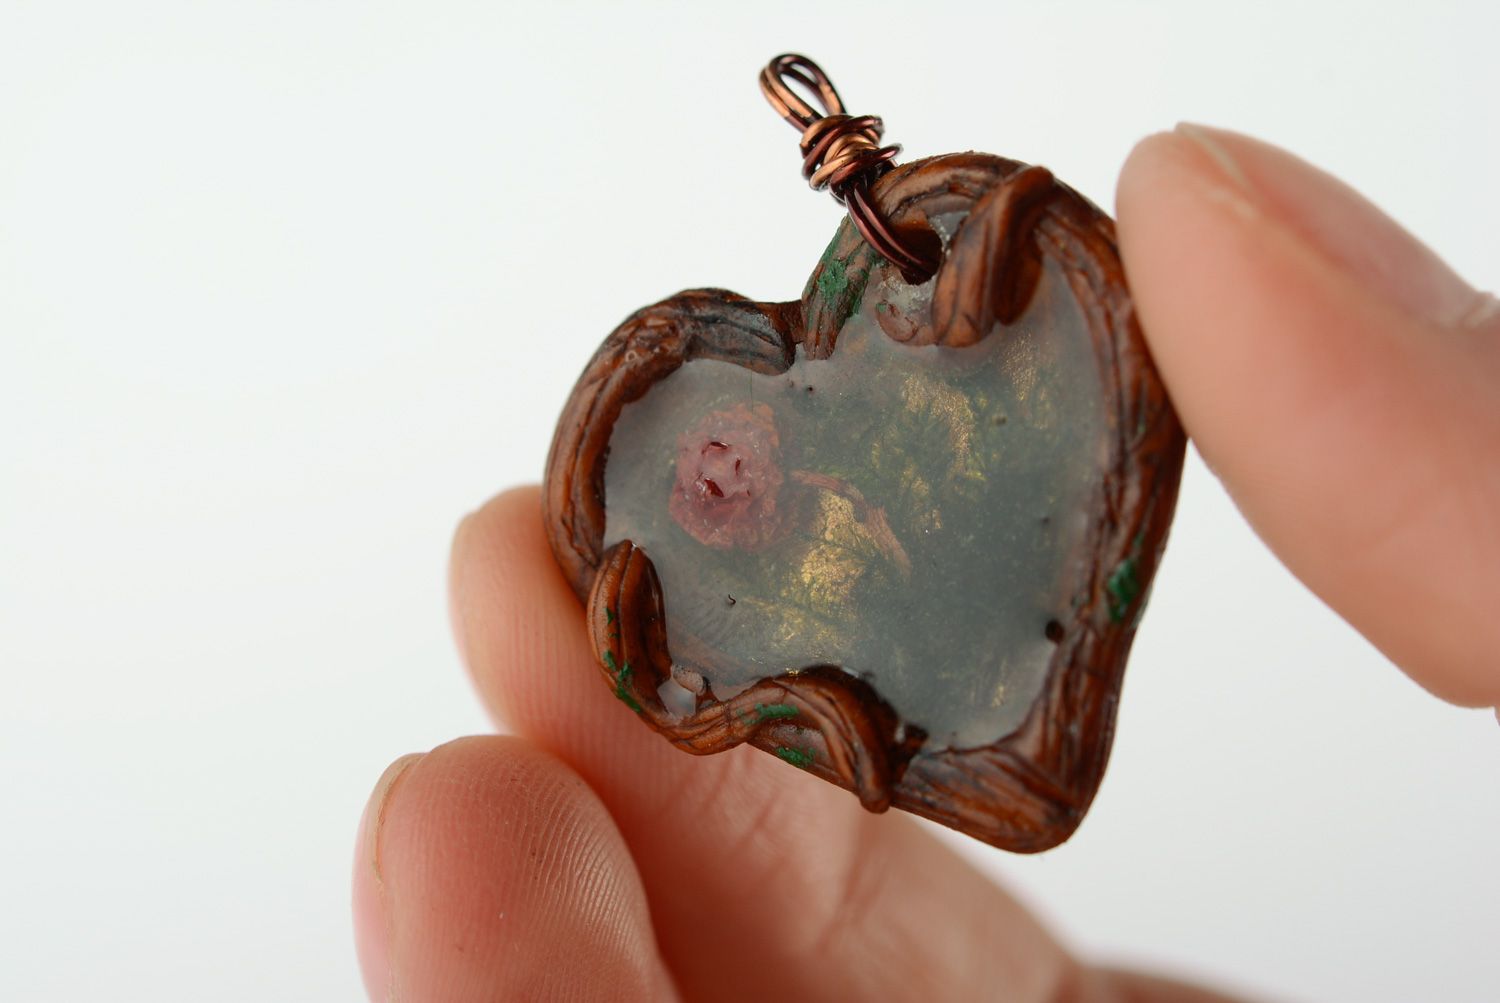 Homemade heart-shaped pendant with moss and berries inside coated with epoxy photo 2